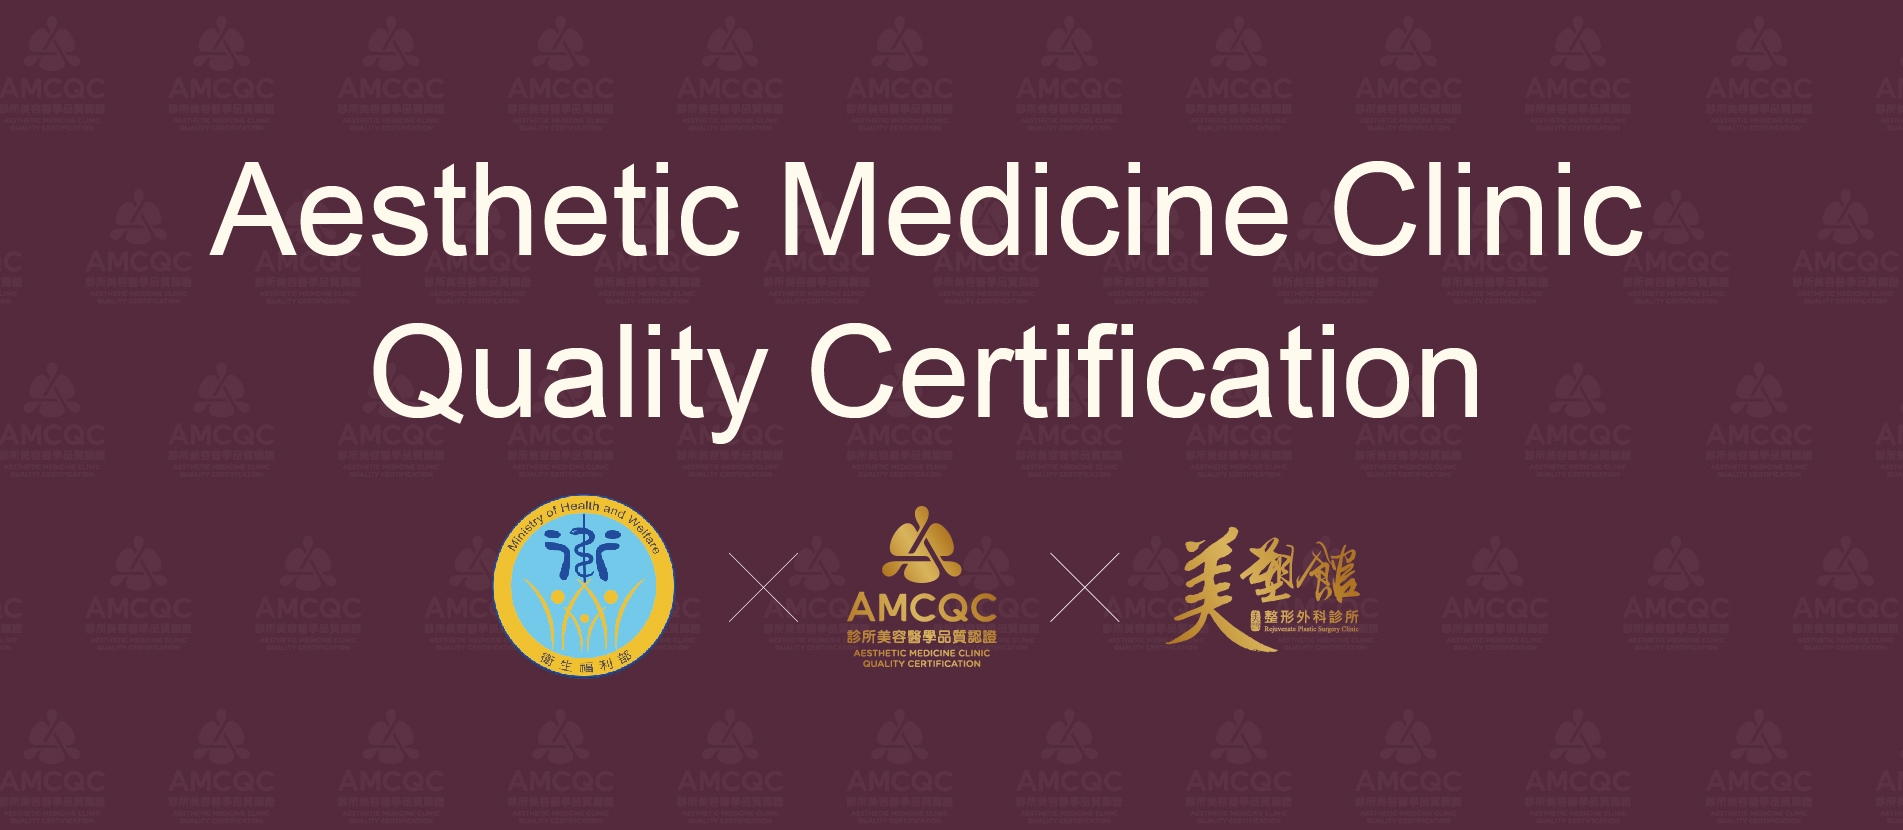 Aesthetic Medicine Clinic Quality Certification